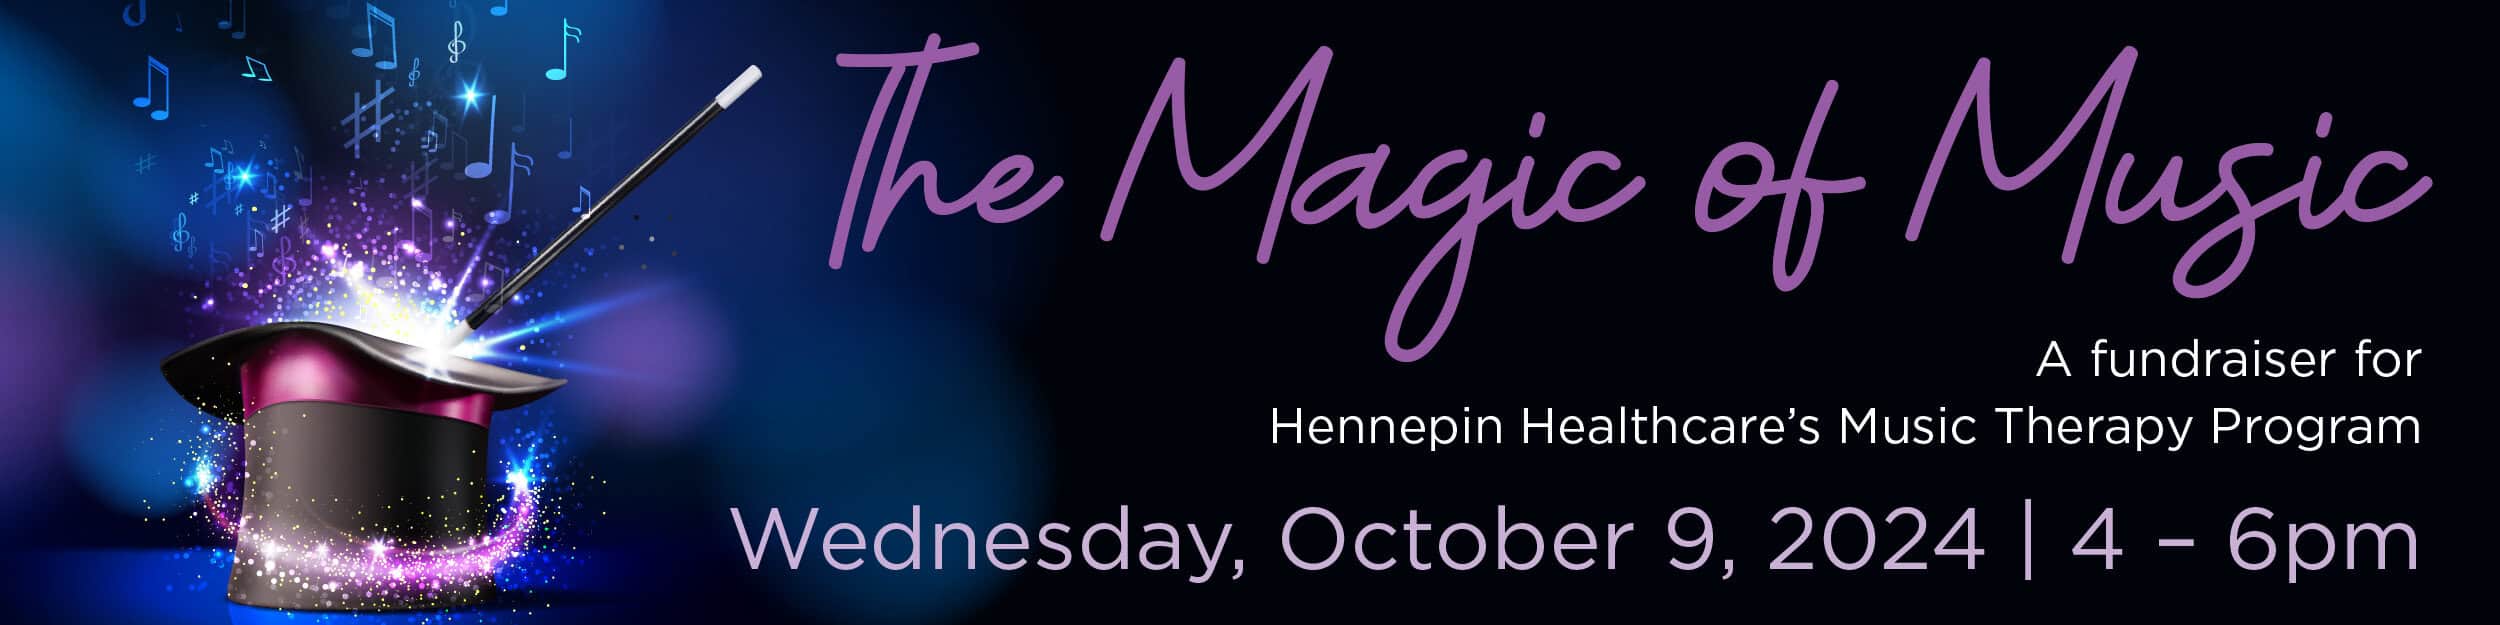 The Magic Of Music Header - Wednesday, October 9